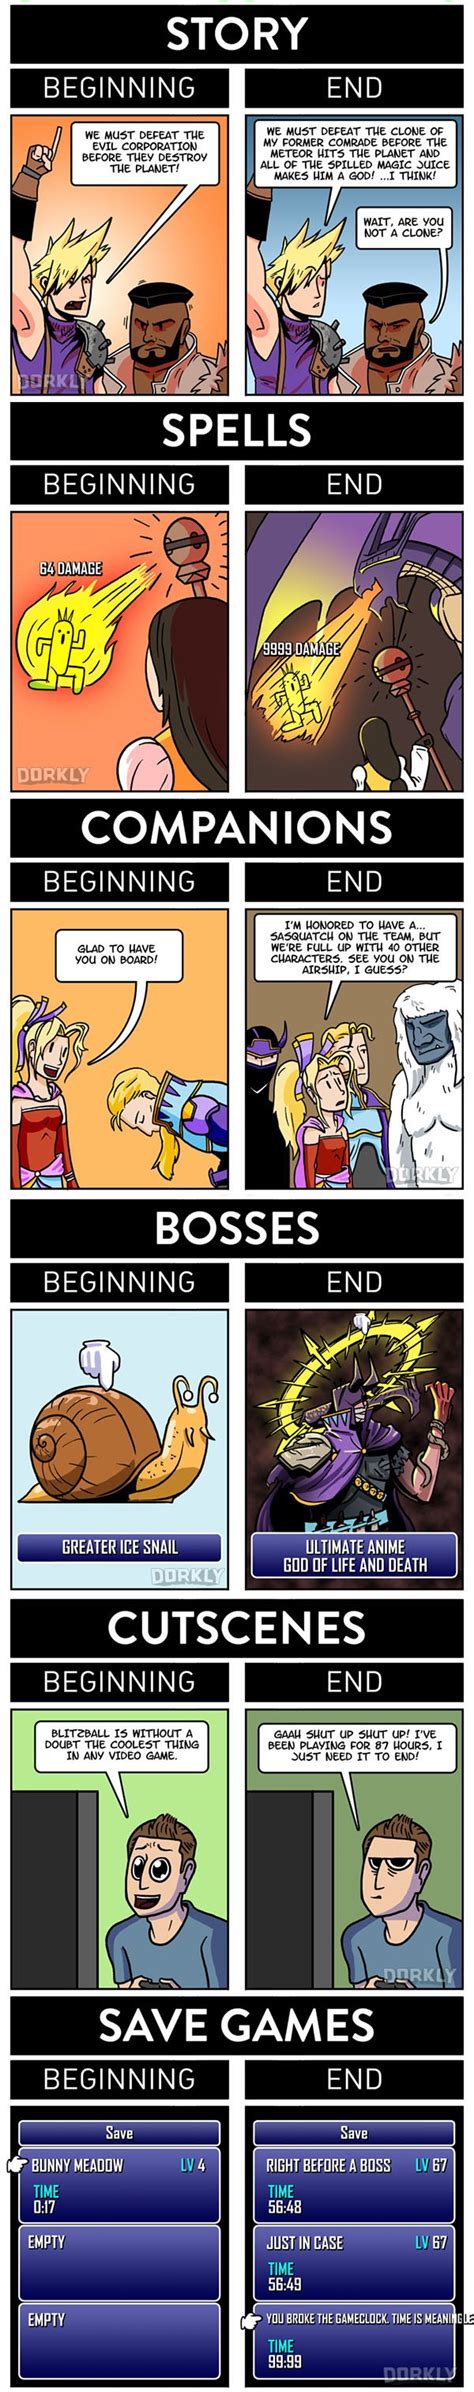 final fantasy pictures and jokes games funny pictures and best jokes comics images video